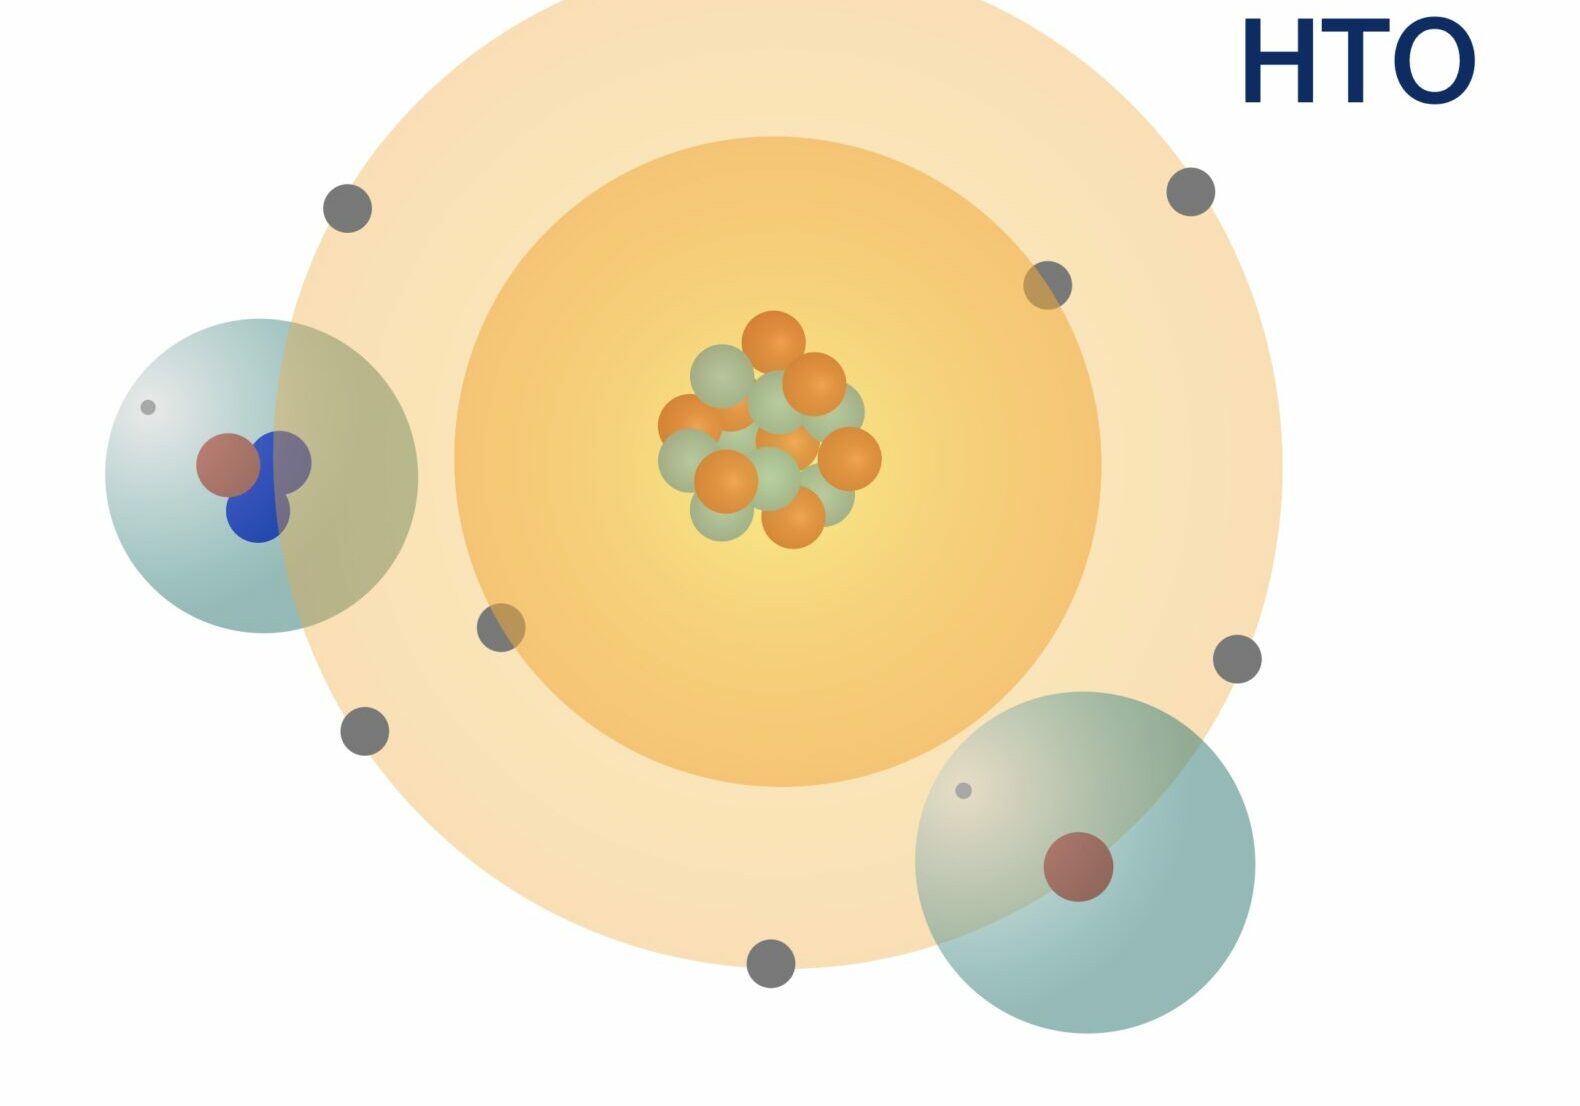 A water molecule made radioactive by the radioactive hydrogen (tritium) attached to it.